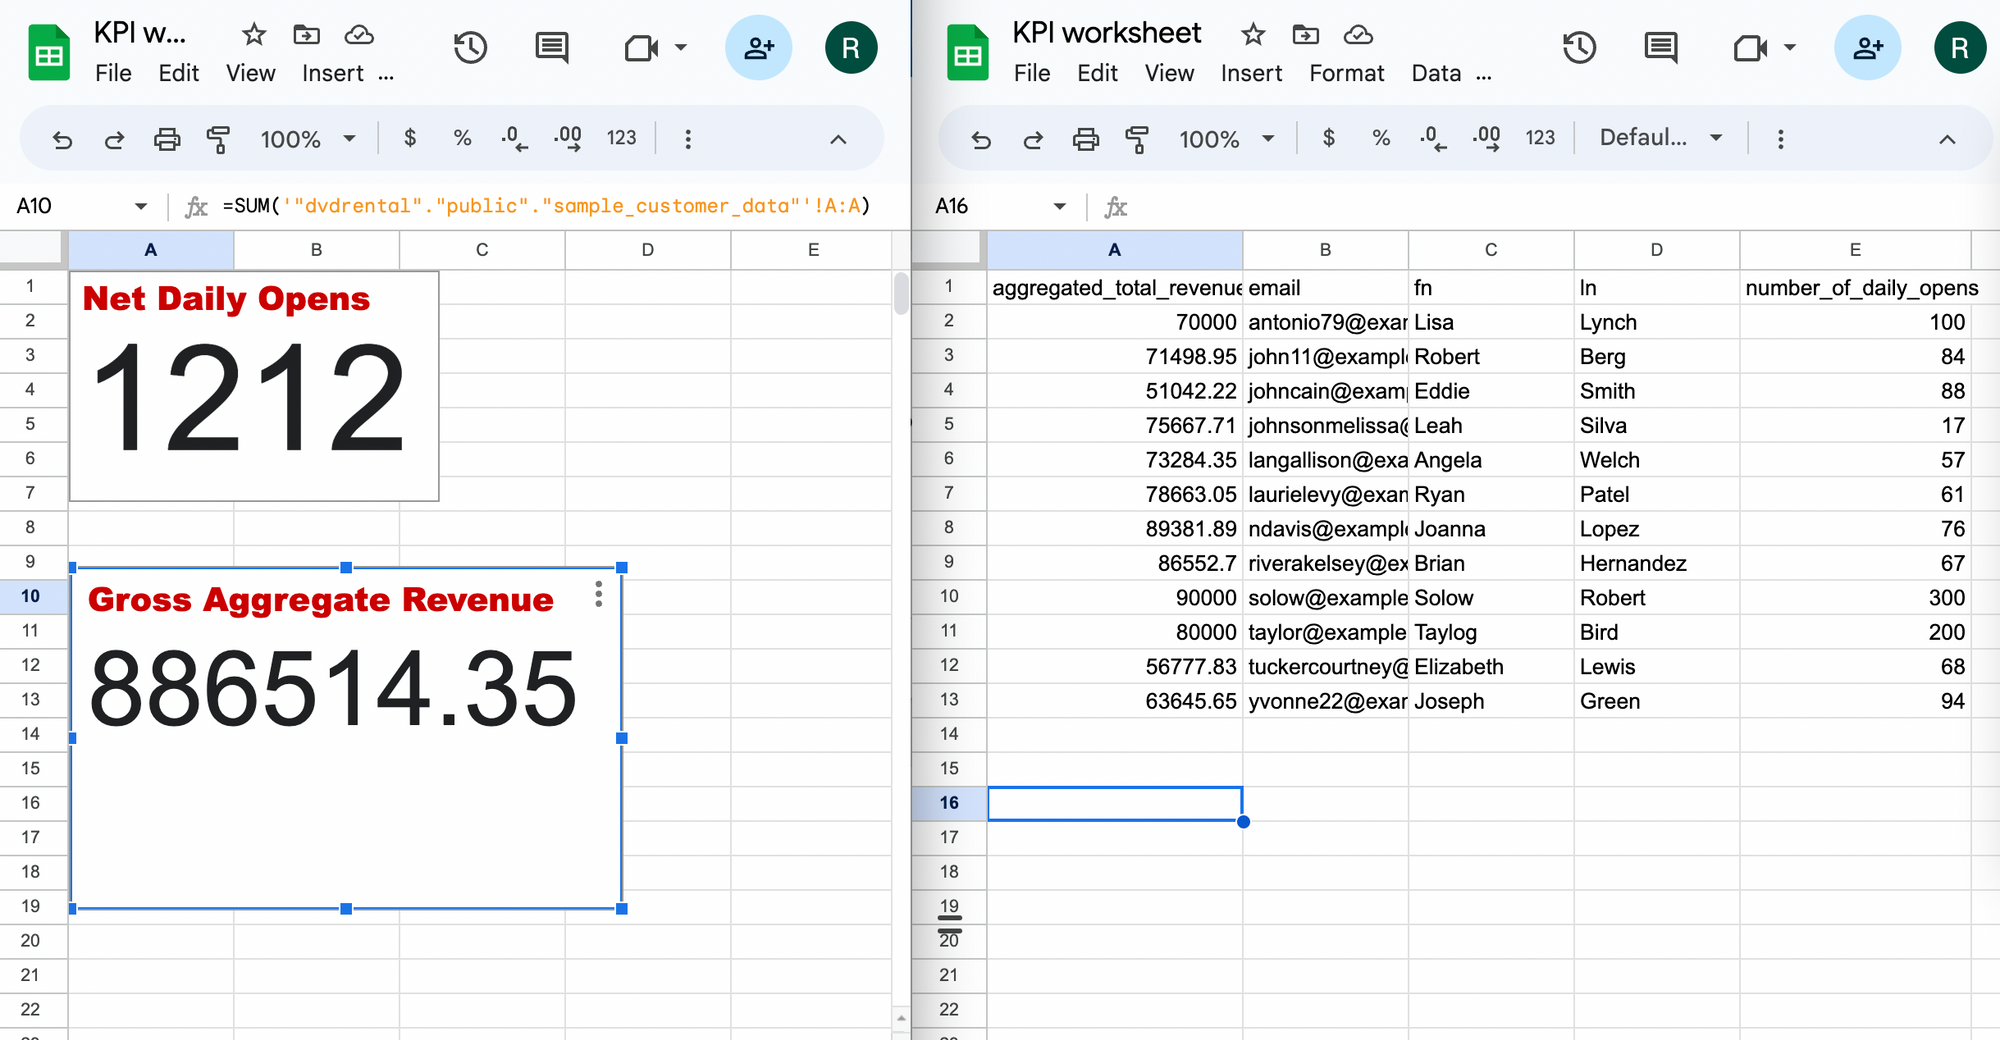 Keep track of KPIs in your favourite analysis tool - Google Sheets.